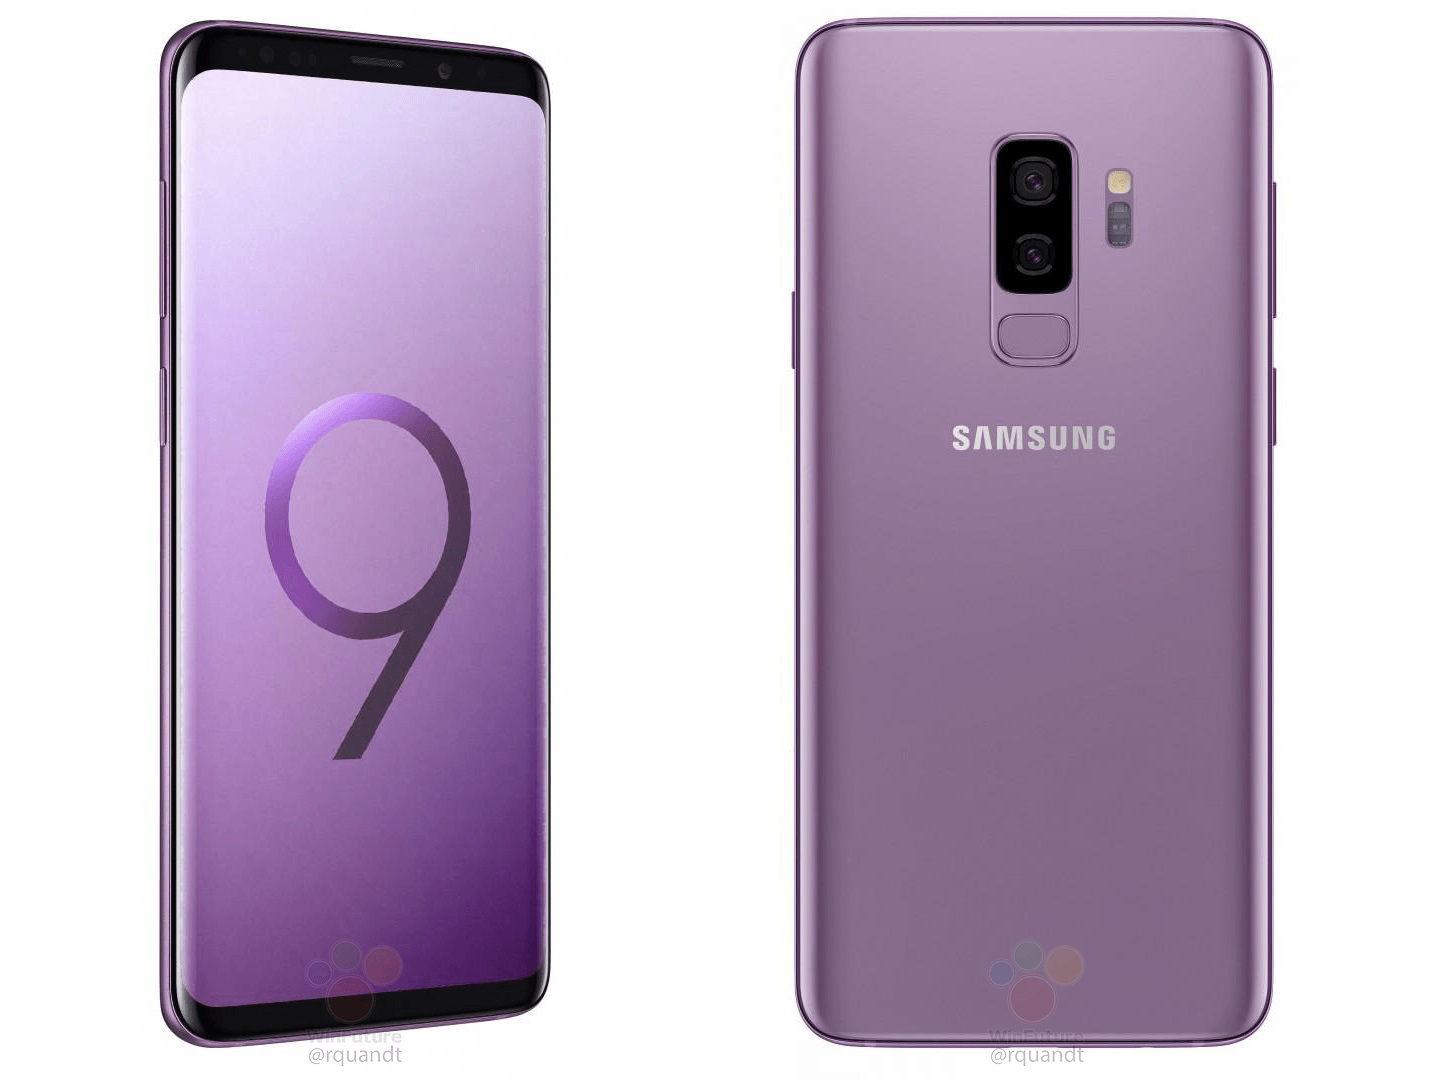 How much is the price of samsung galaxy s9 plus Samsung Galaxy S9 And S9 Plus European Prices Have Leaked But They Re Weird